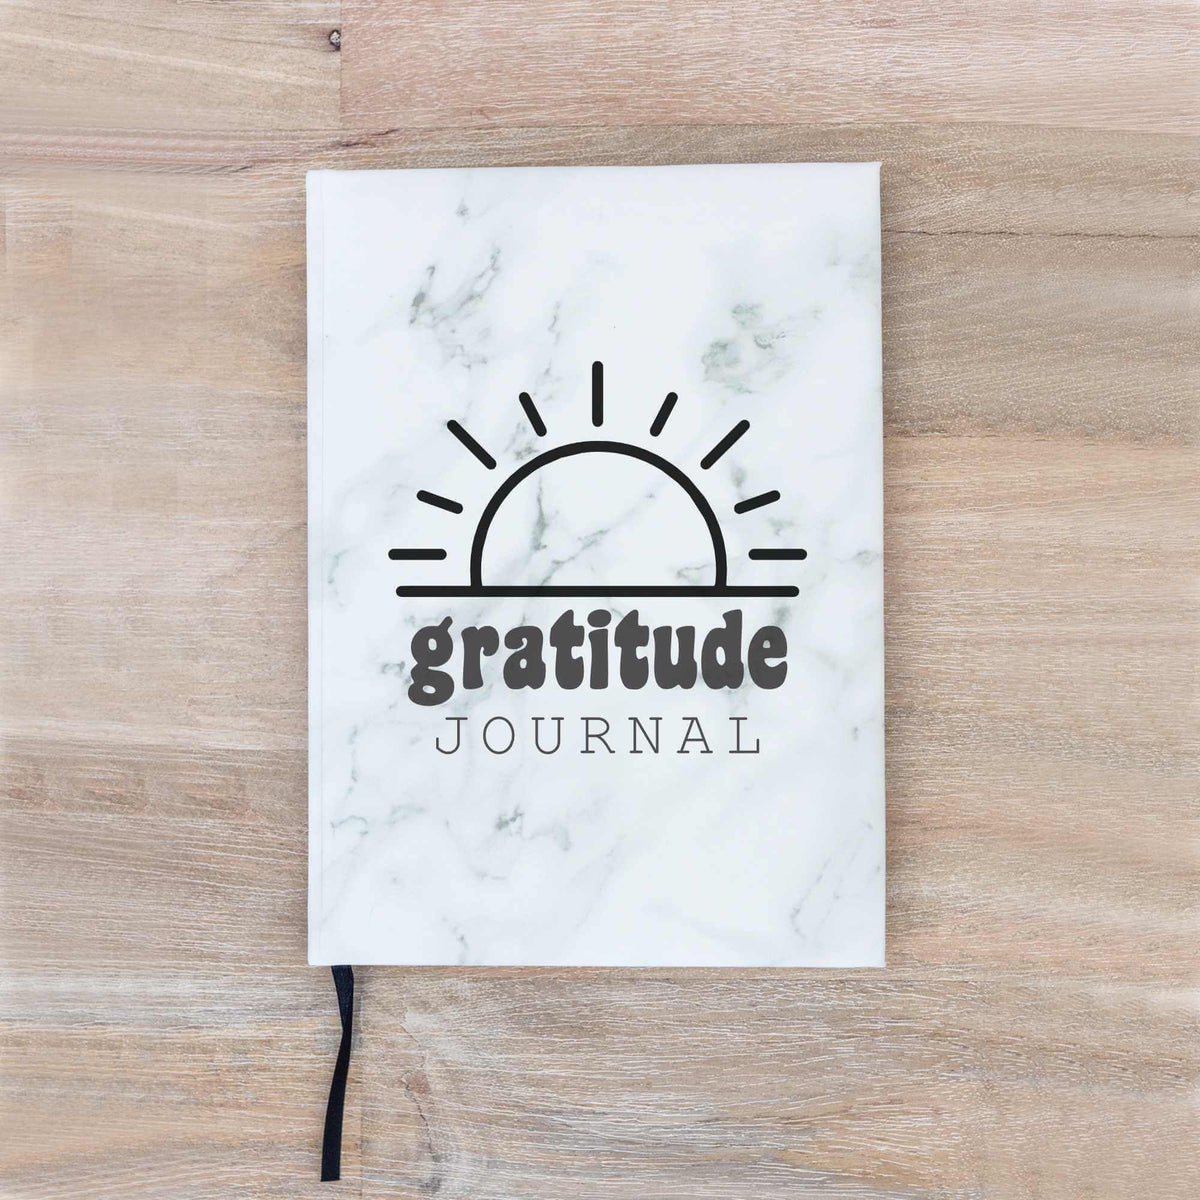 Daily Gratitude Journal Color: Leather